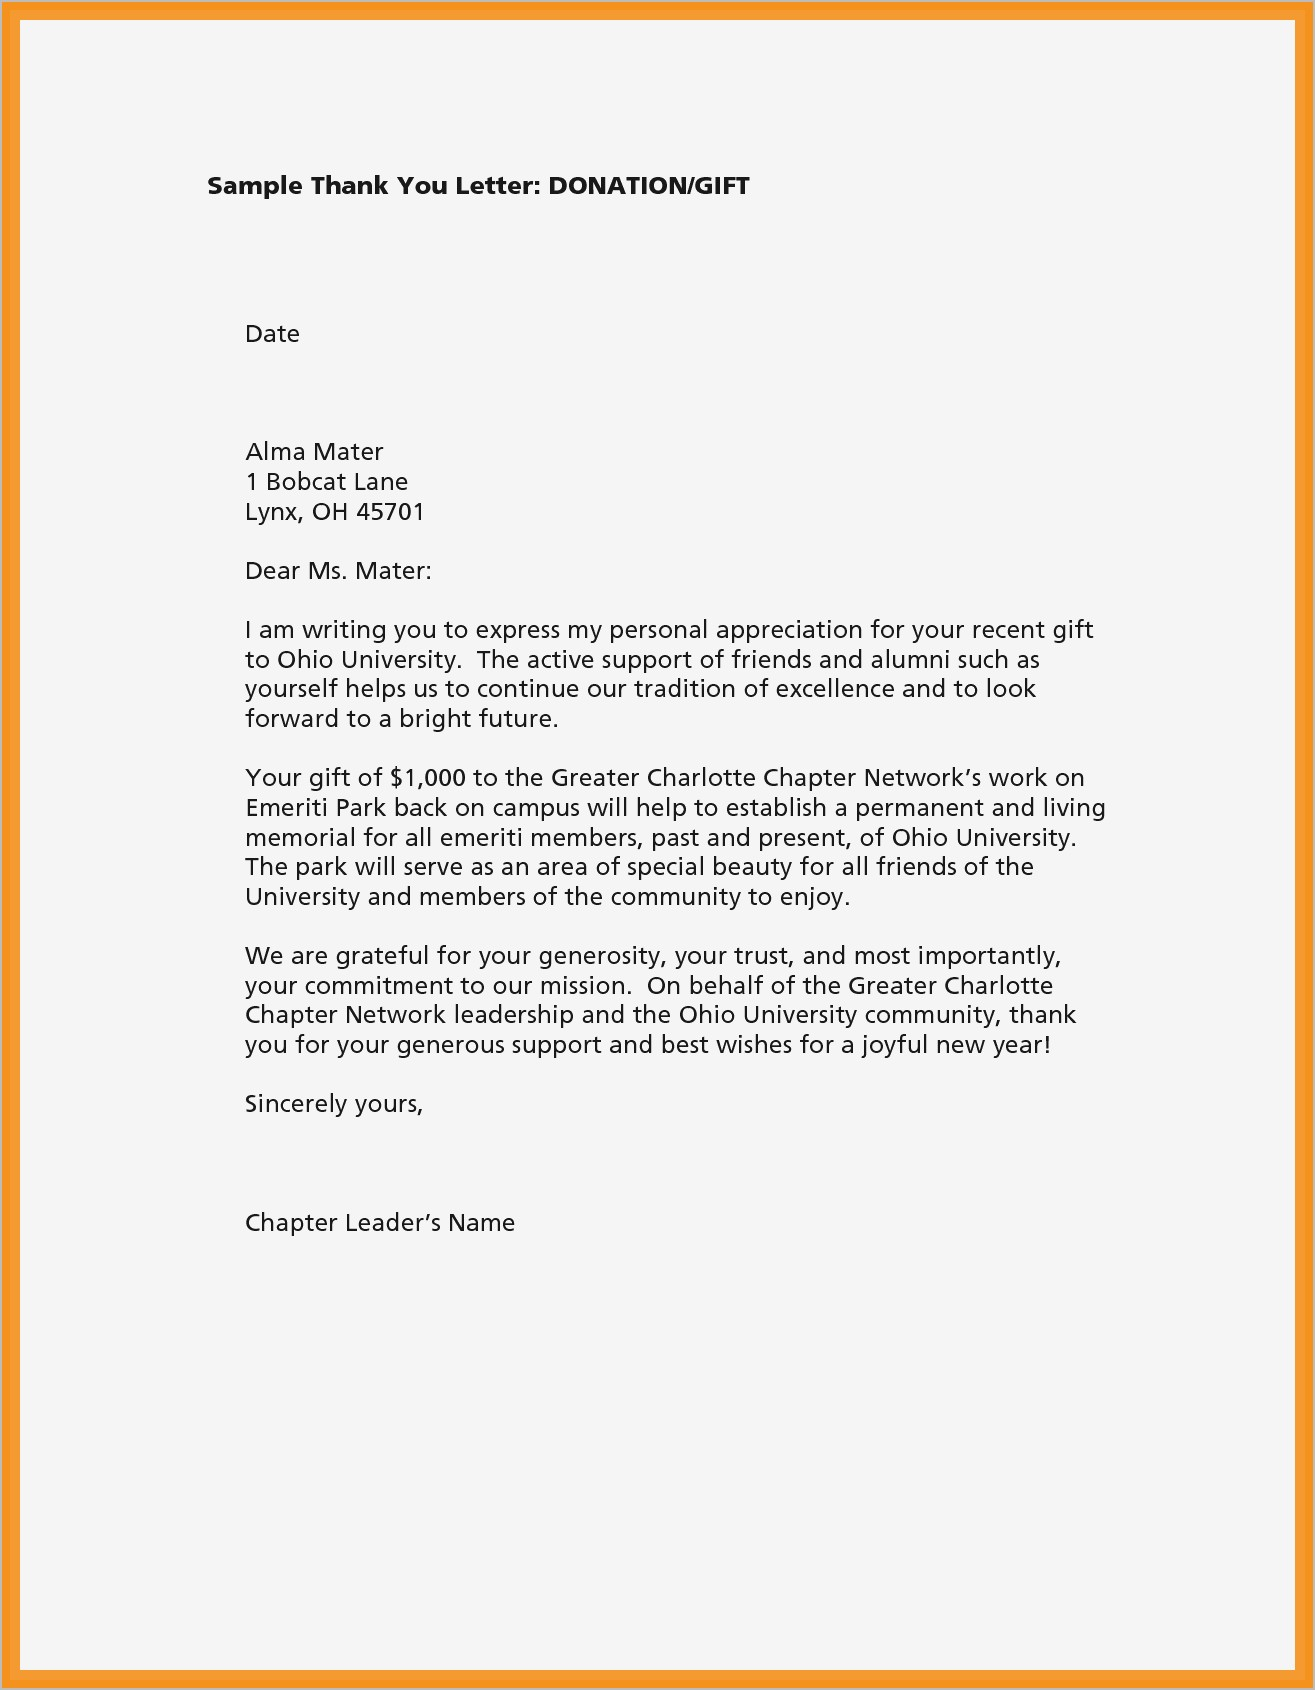 Memorial Donation Letter Template - Sample Thank You Letter for Donation Ideas